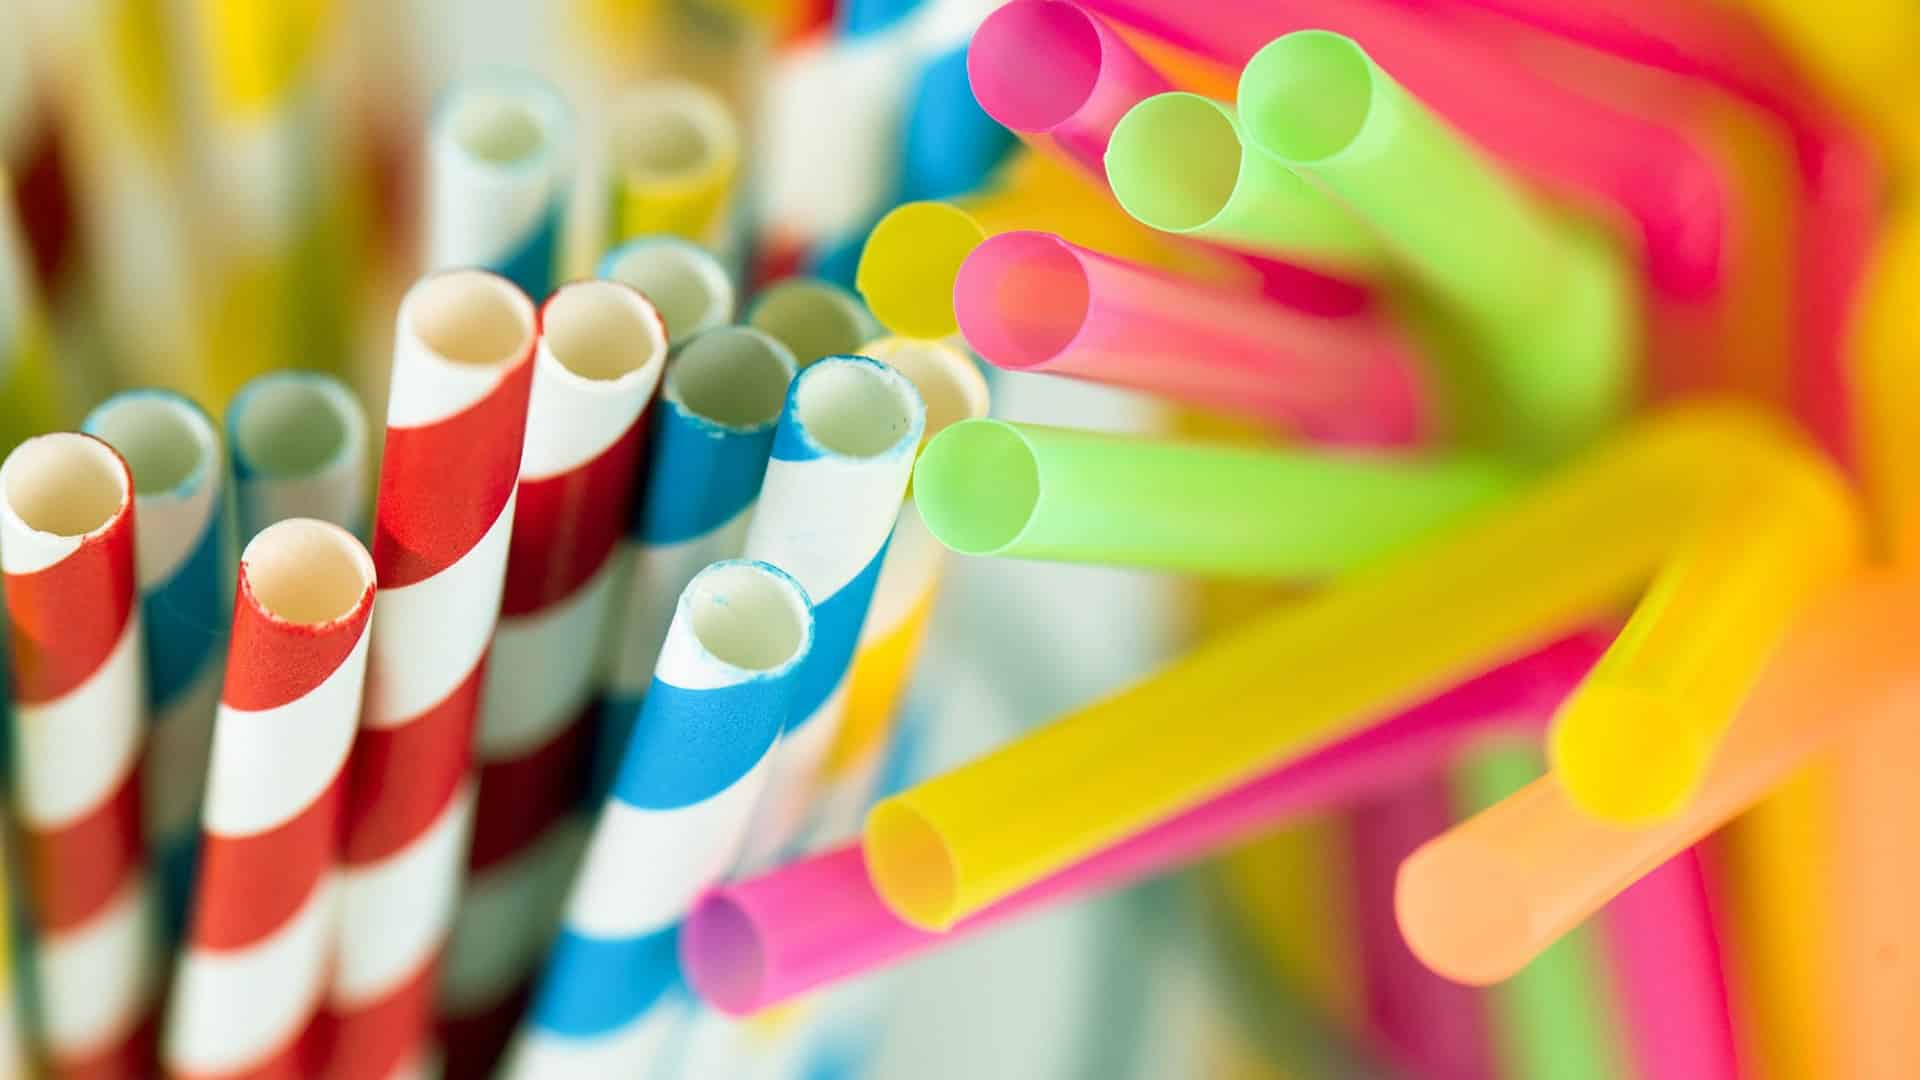 Plastic ban: Imported paper straws to have cost implications, says packaged food industry